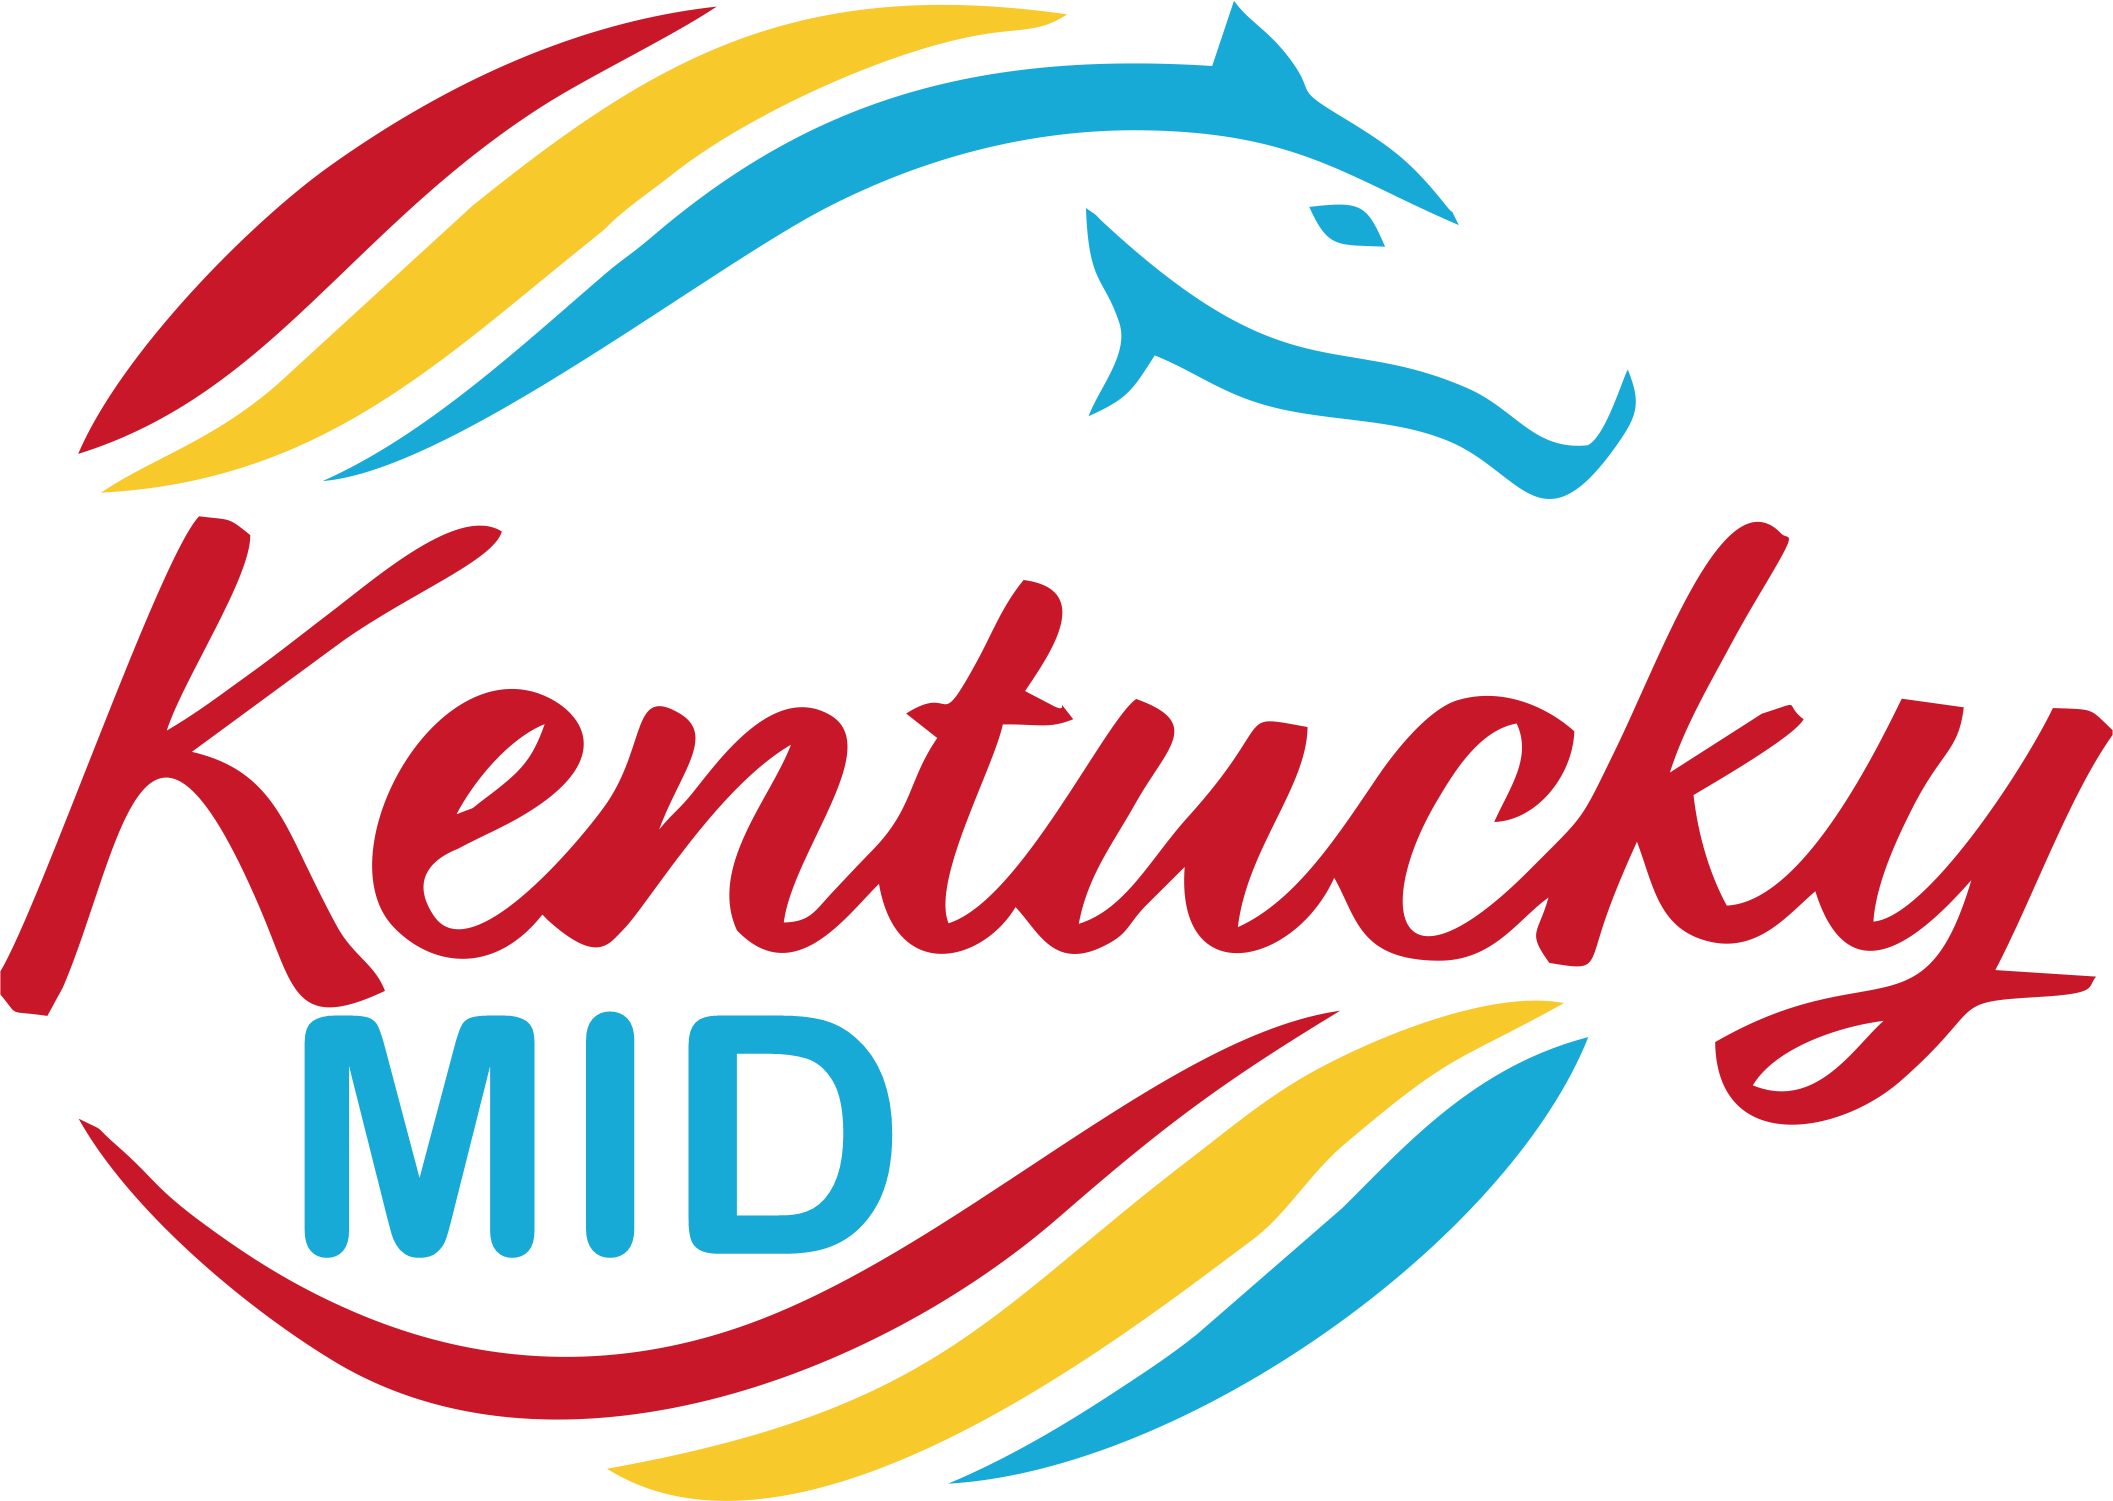 Live Draw Kentucky Midday